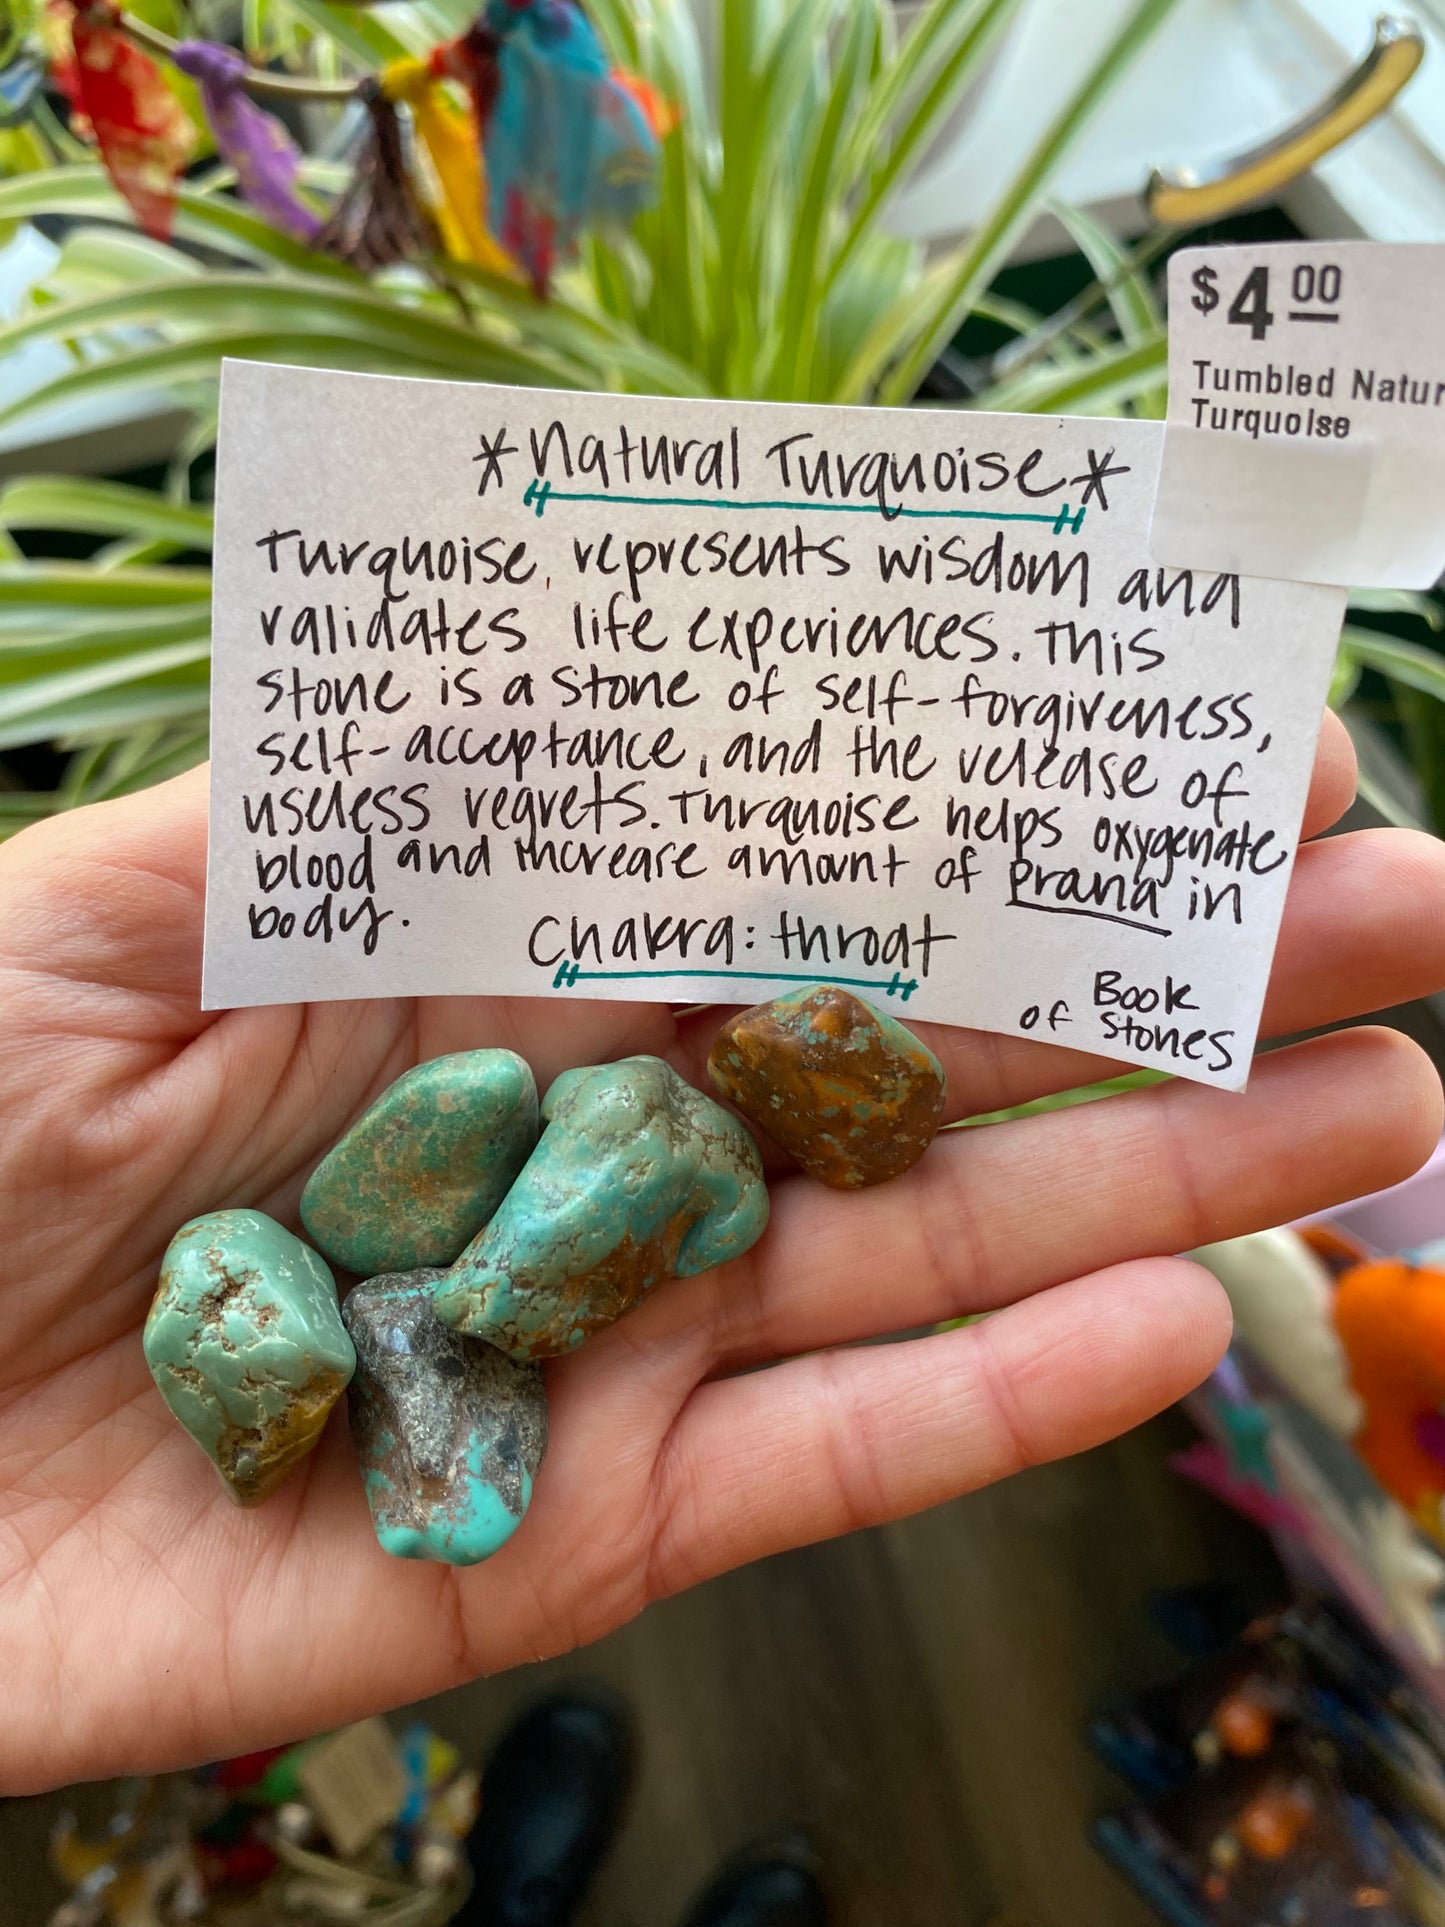 Tumbled Natural Turquoise - Moon Room Shop and Wellness